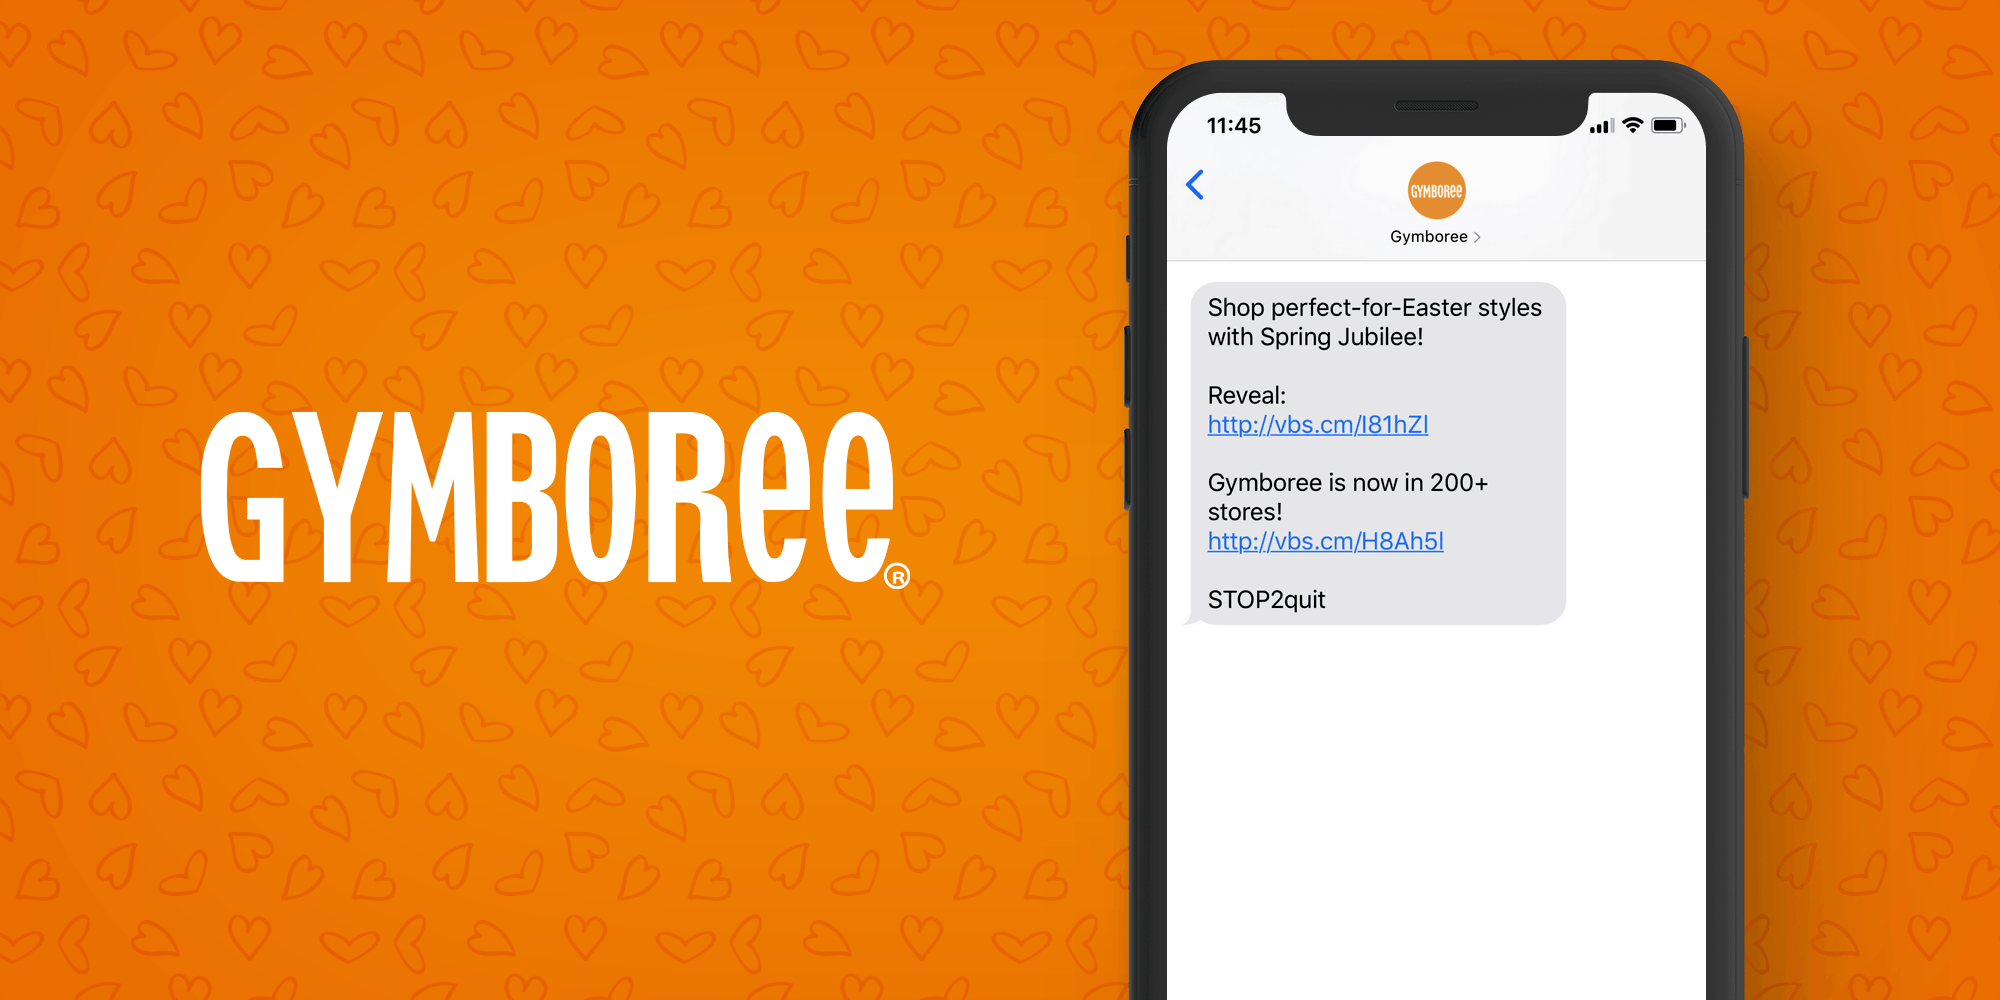 Gymboree SMS Marketing Example - 50 Examples of Brands Using SMS Marketing